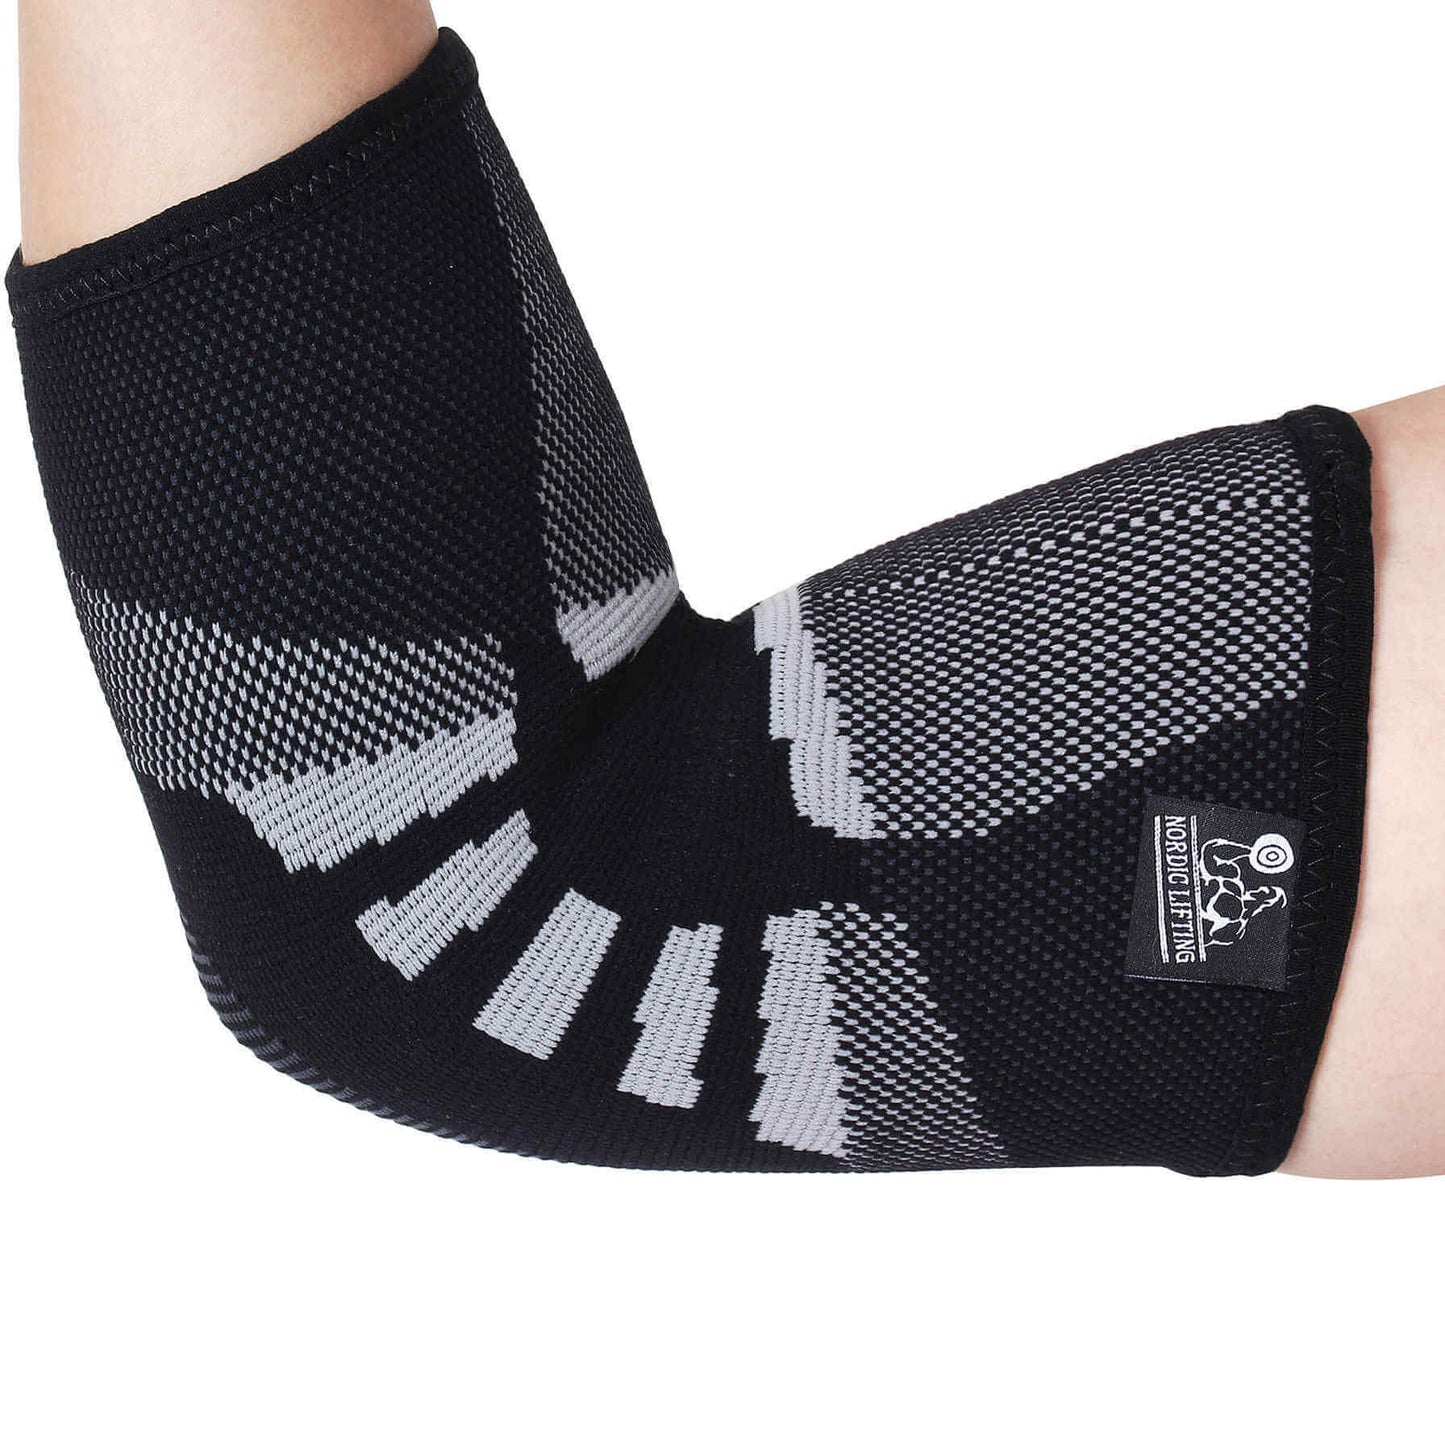 Elbow Compression Sleeves